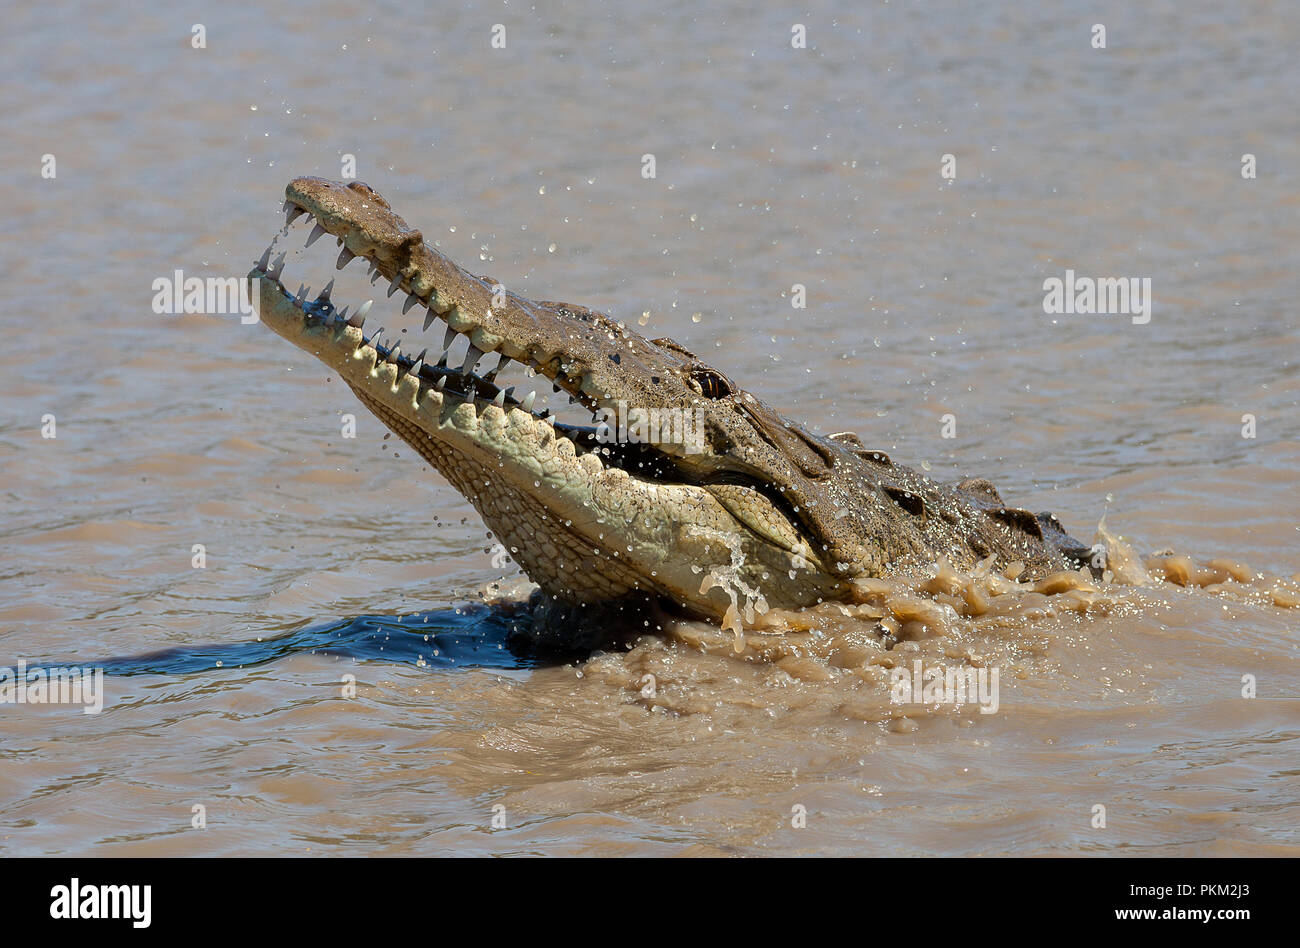 An american crocodile photographed while emerging from the Tarcoles river in Costa Rica Stock Photo